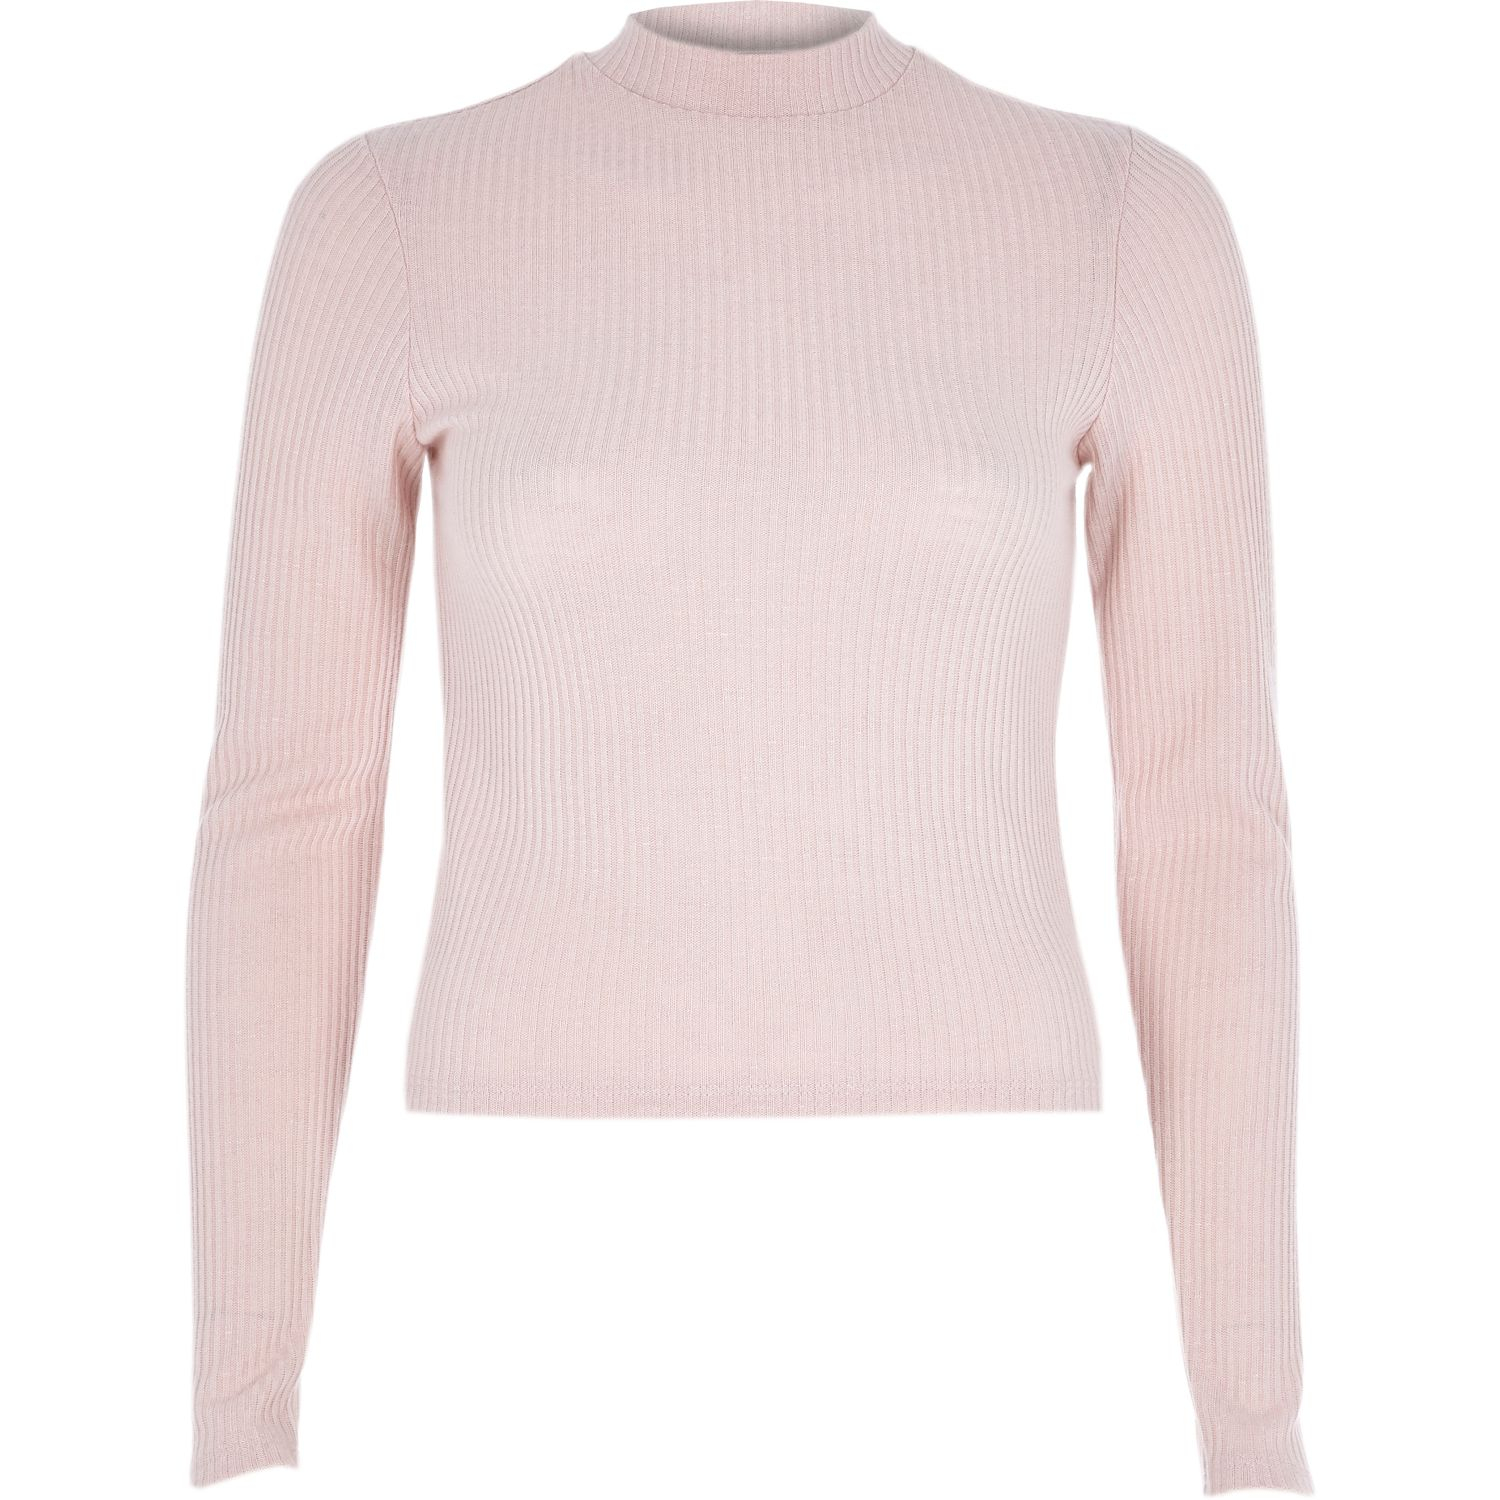 River island Light Pink Ribbed Long Sleeve High Neck Top in Pink | Lyst